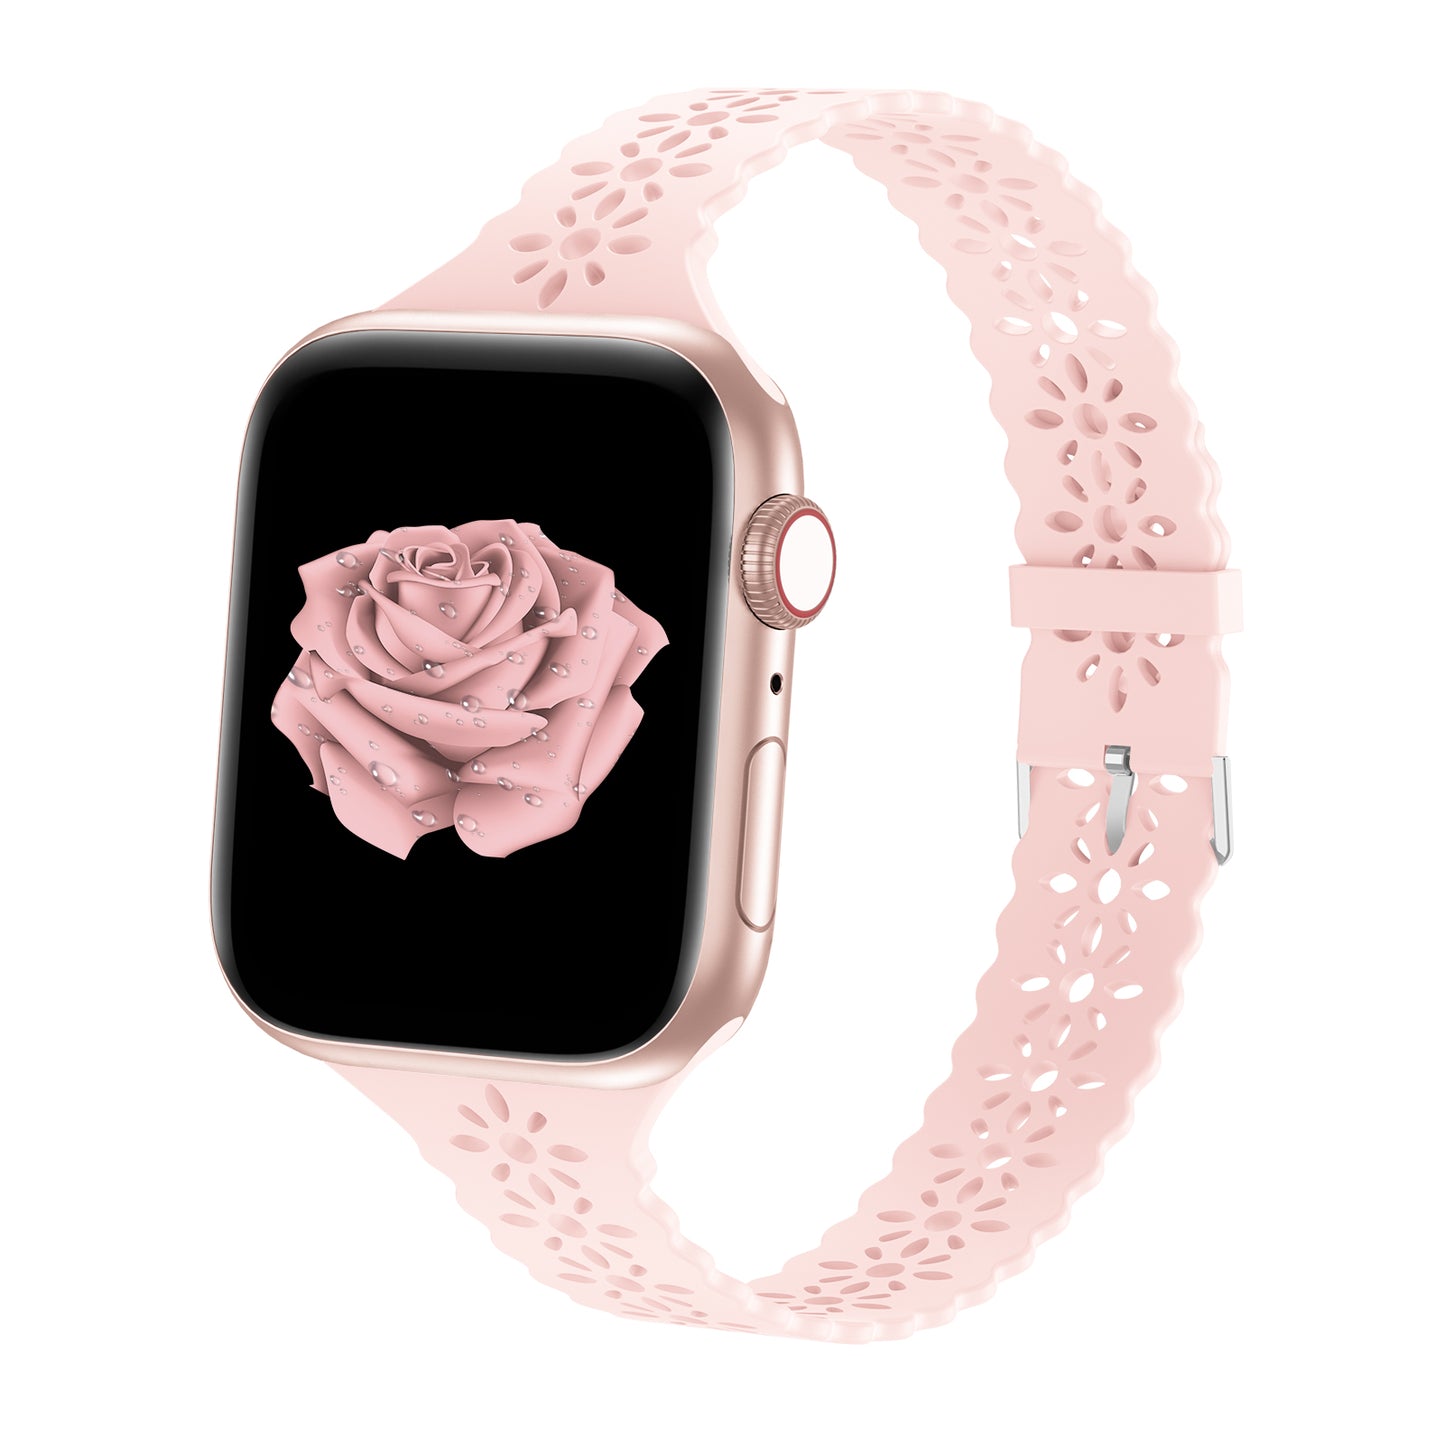 Silicone Apple Watch Bands | Lace Watch Bands | My Pretty Tingz